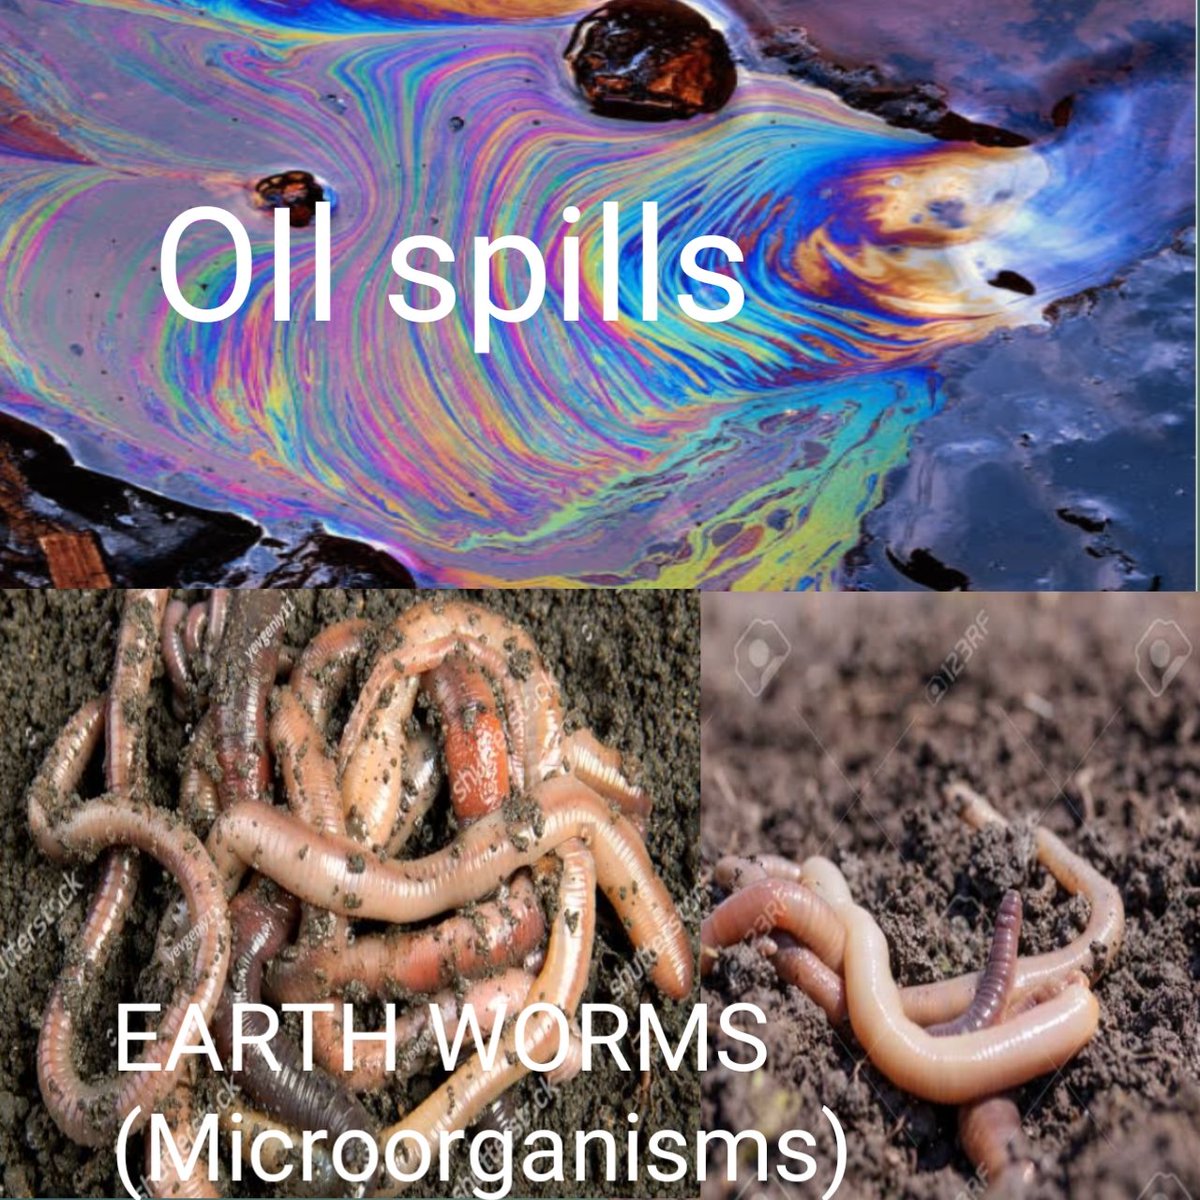 Earth worms play vital roles including but not limited to aeration of the soils which provides man kind with livelihood.
EACOP pipeline is bound to burst like any other pipelines have burst and spilled causing death of microorganisms that make soil conducive 4 crops 
@stopEACOP